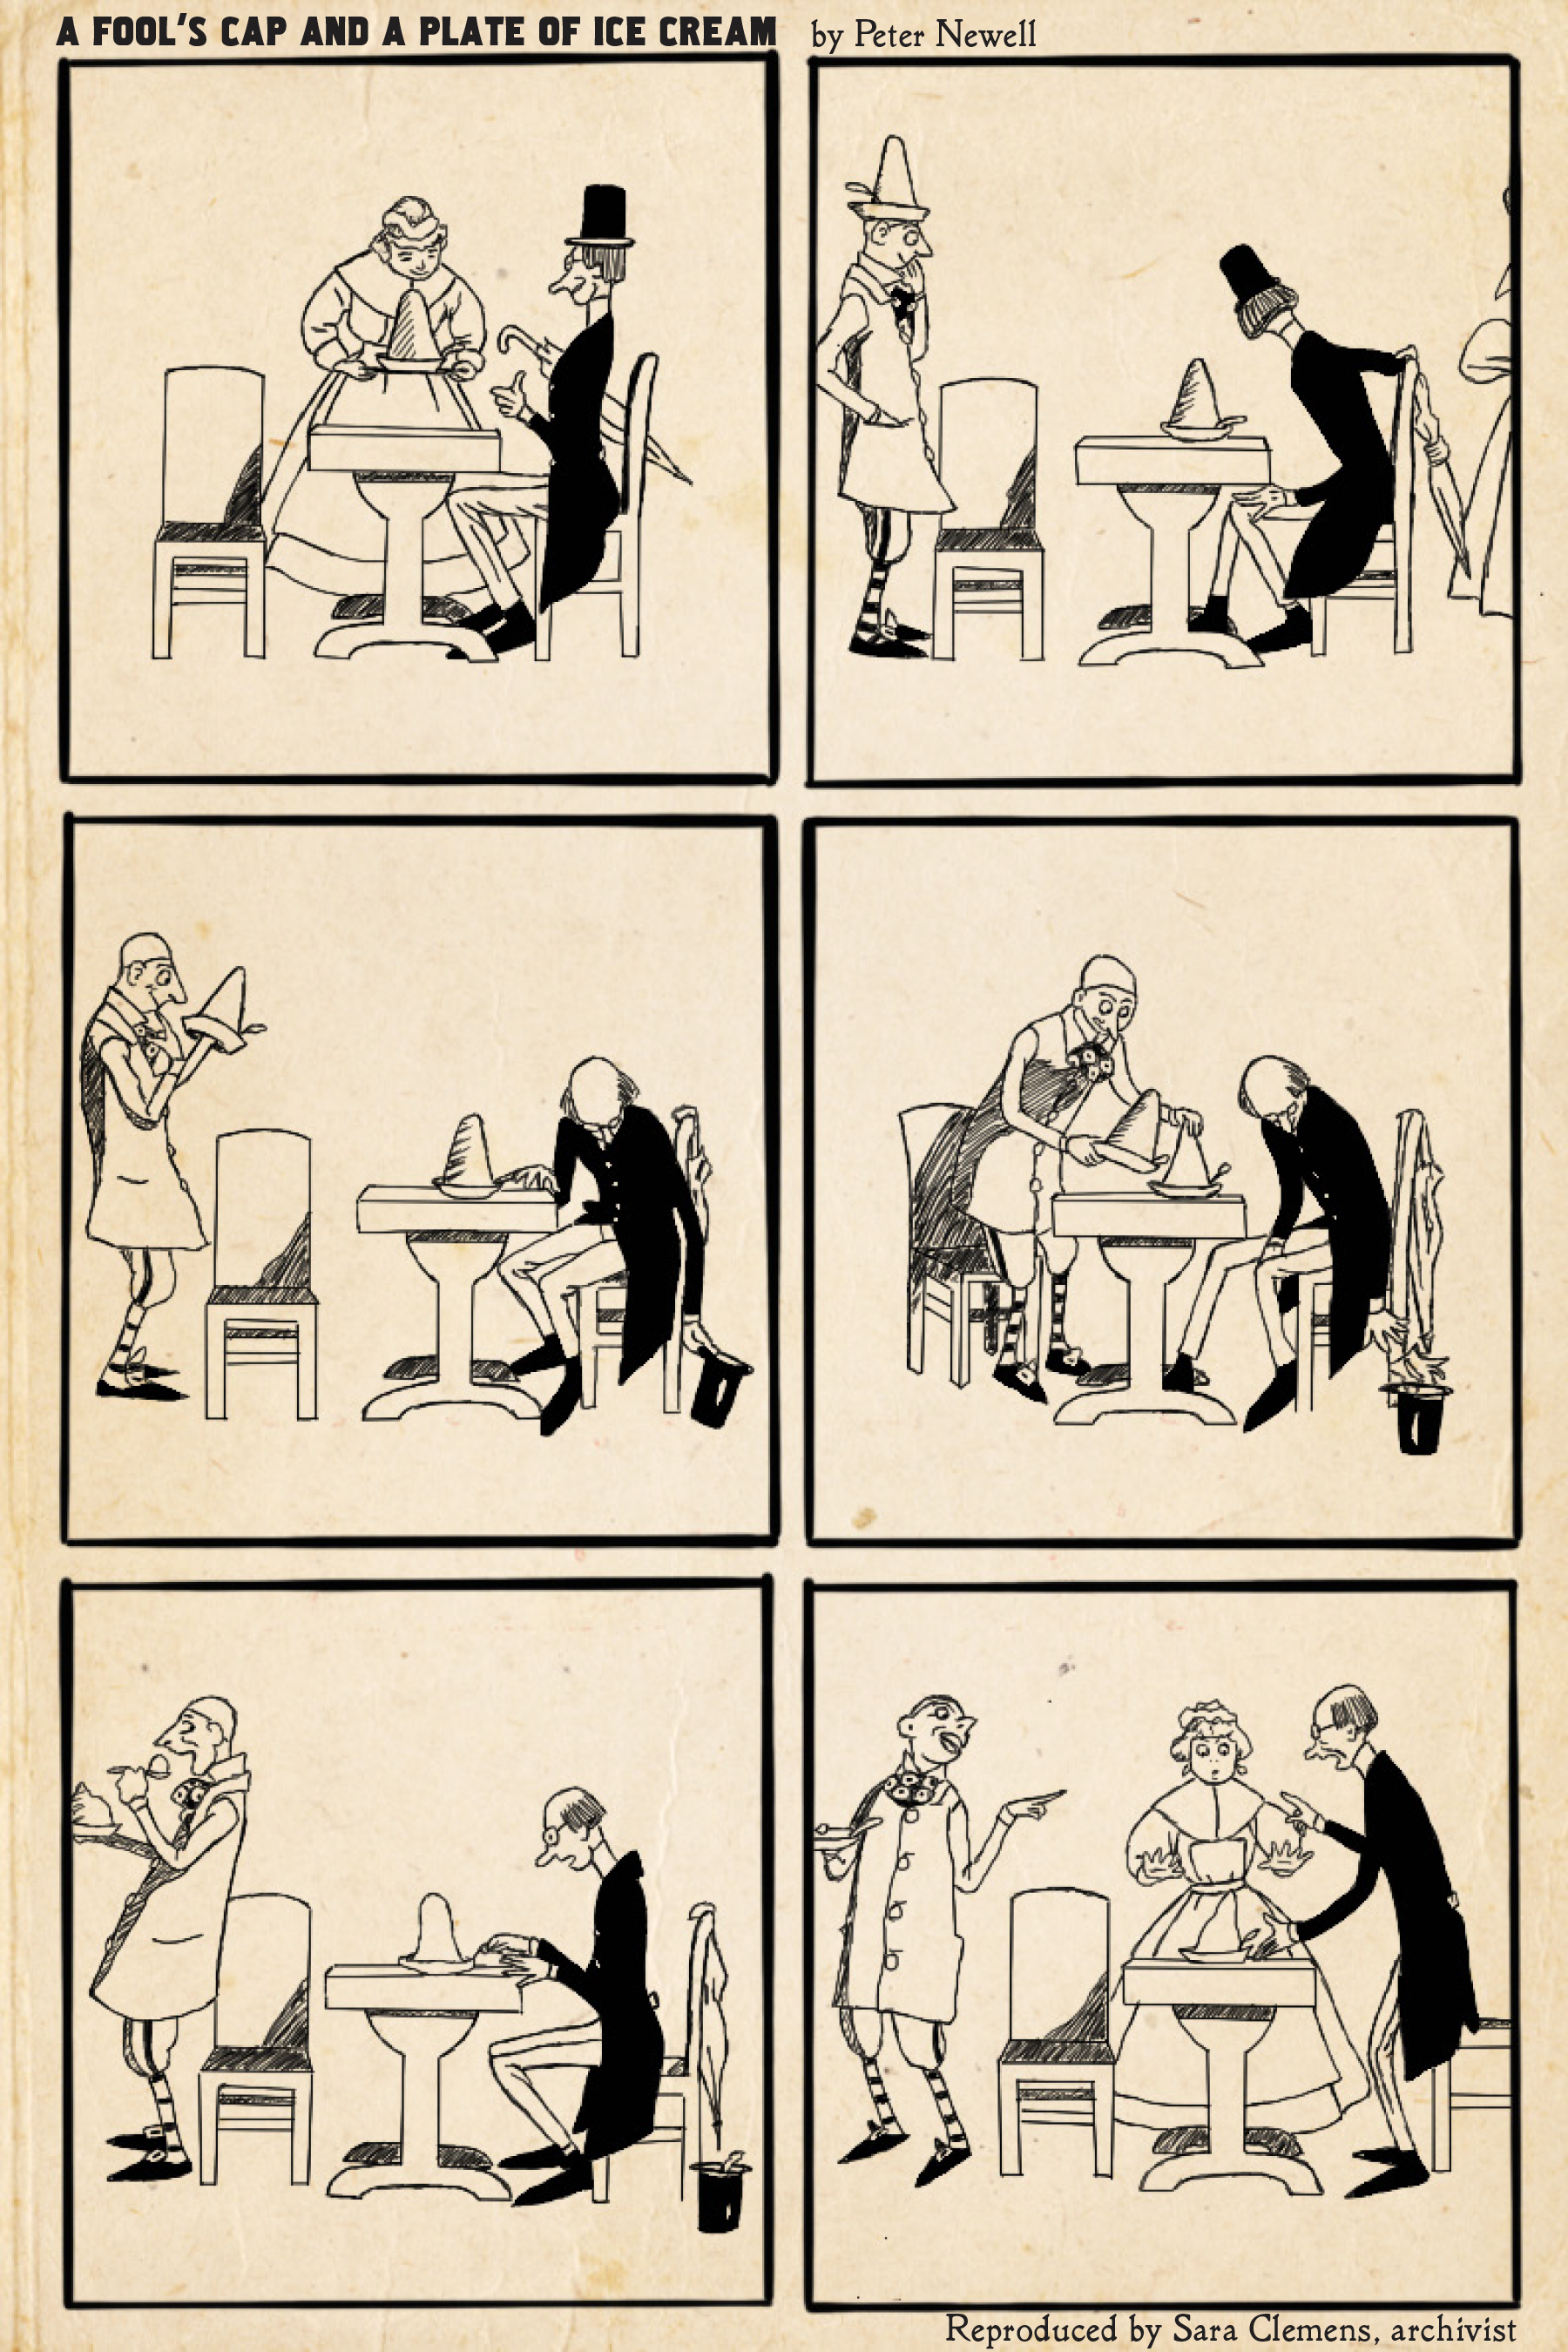 A six-panel comic strip in which a fool replaces a rich man's plate of ice cream with his own (the fool's) hat and the rich man doesn't notice until the last second.